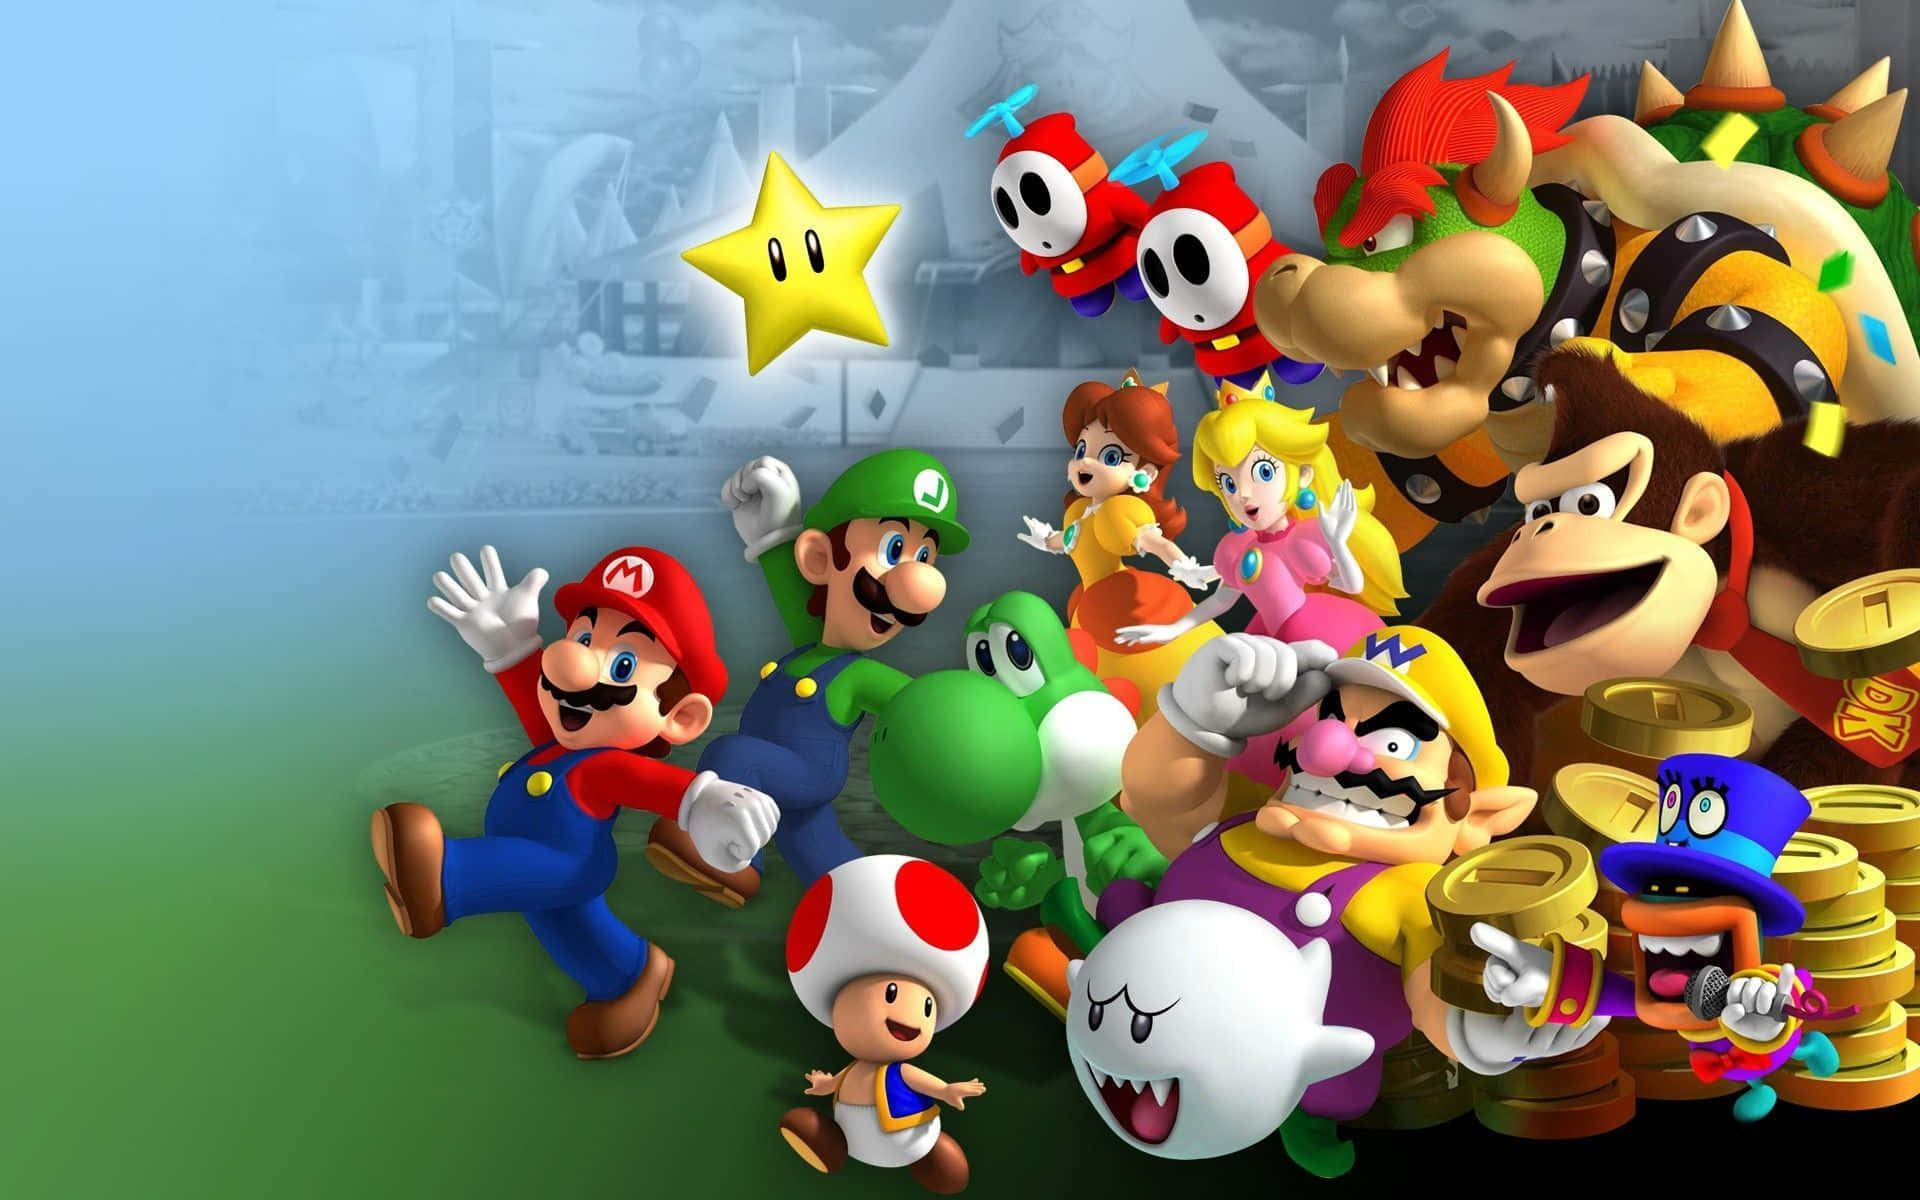 A Group Of Nintendo Characters Posing For A Picture